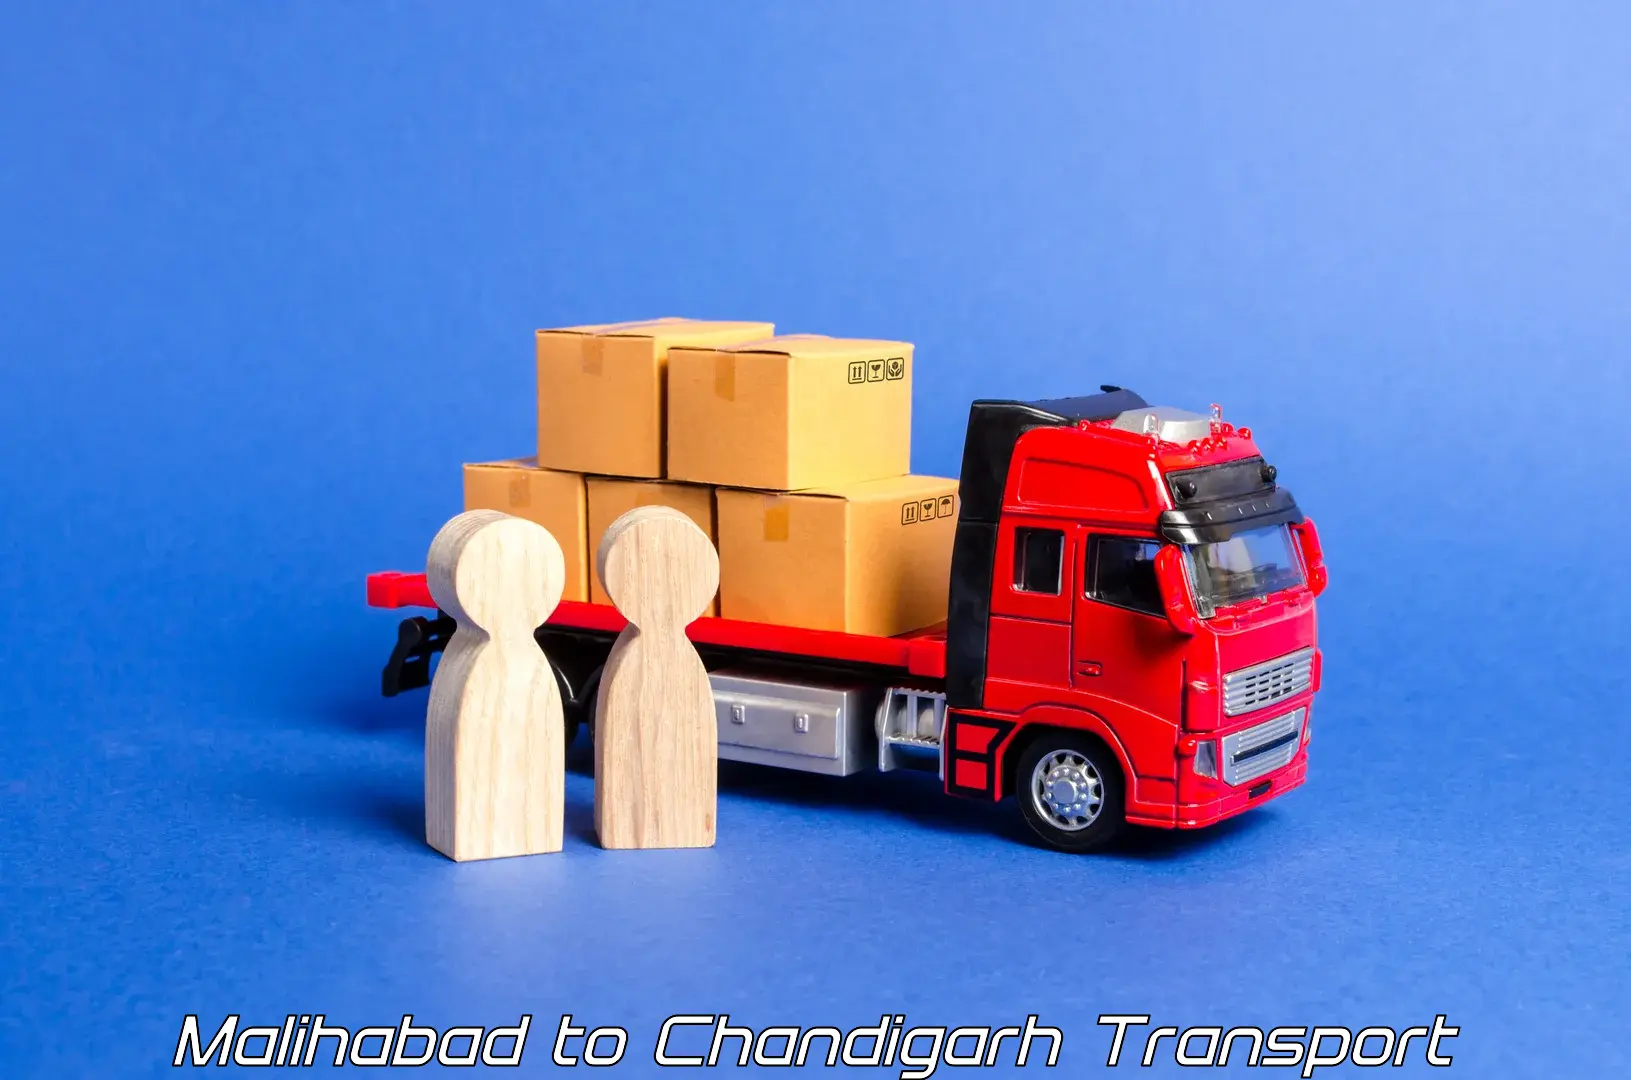 Daily parcel service transport Malihabad to Chandigarh